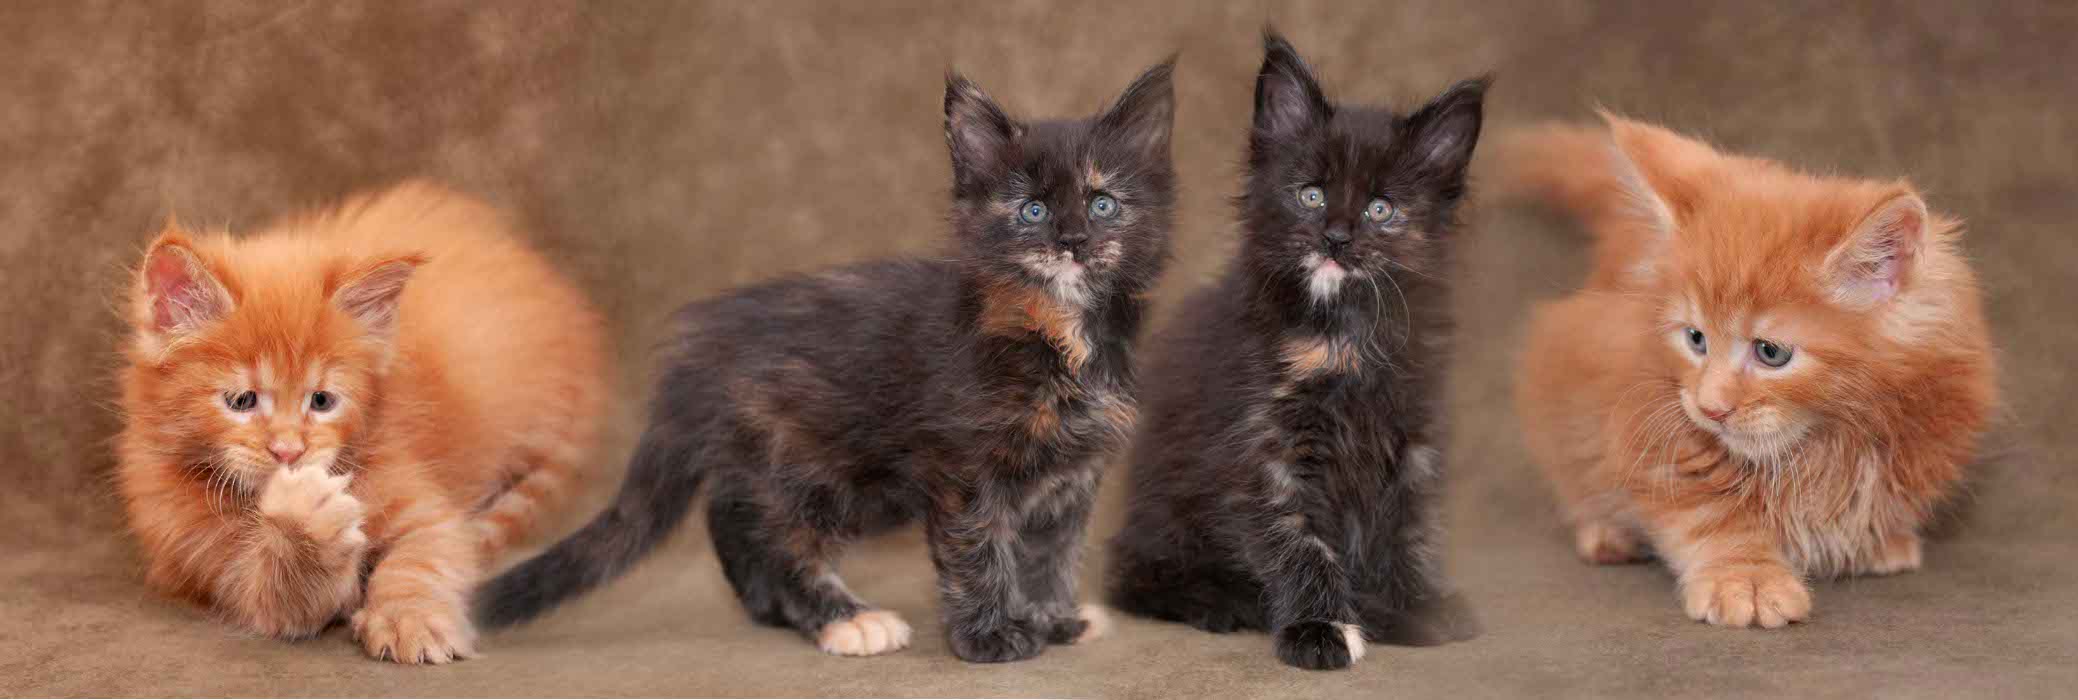 Image: Maine Coon Kittens